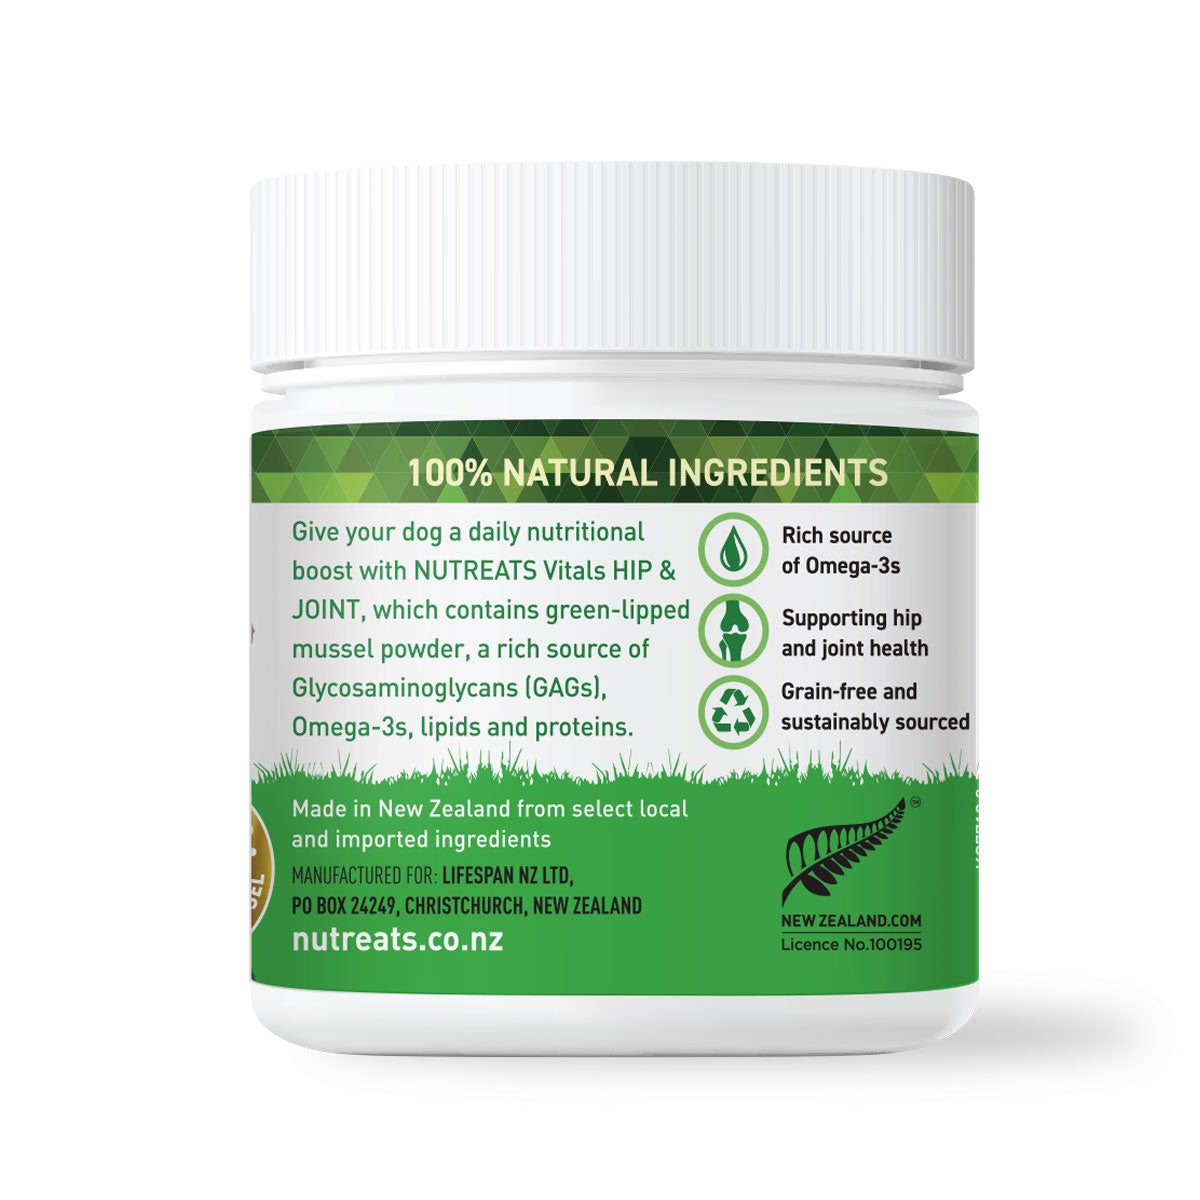 Nutreats Vitals Hip & Joint powder for dogs - supplement supporting healthy joints and mobility in dogs. 100% natural supplement with green-lipped mussel powder rich in Omega-3. Supports joint health in dogs.